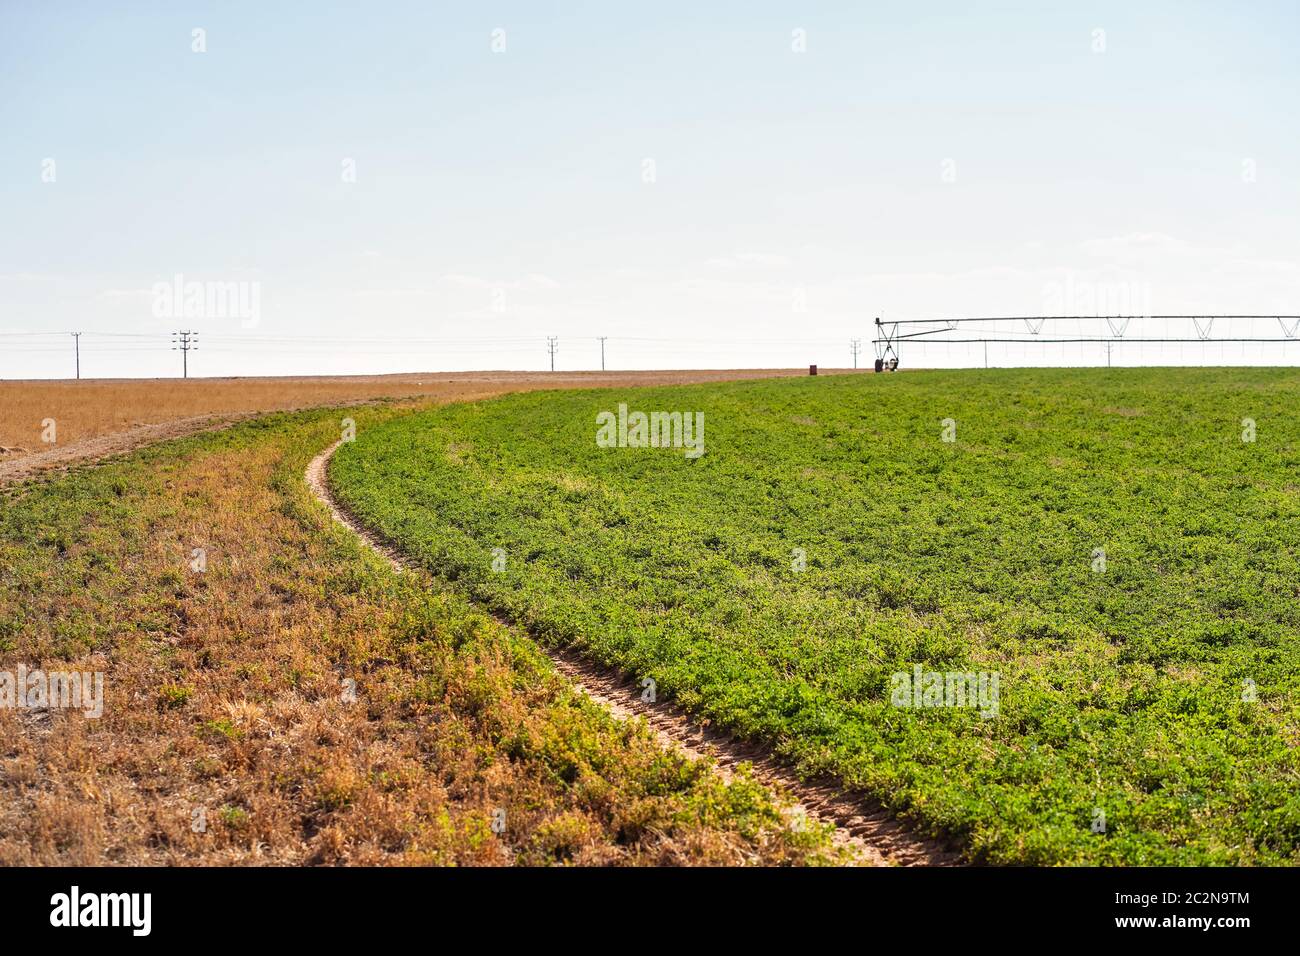 Landscape shot of agriculture fields irrigated with groundwater in desert area in northern Saudi Arabia Stock Photo